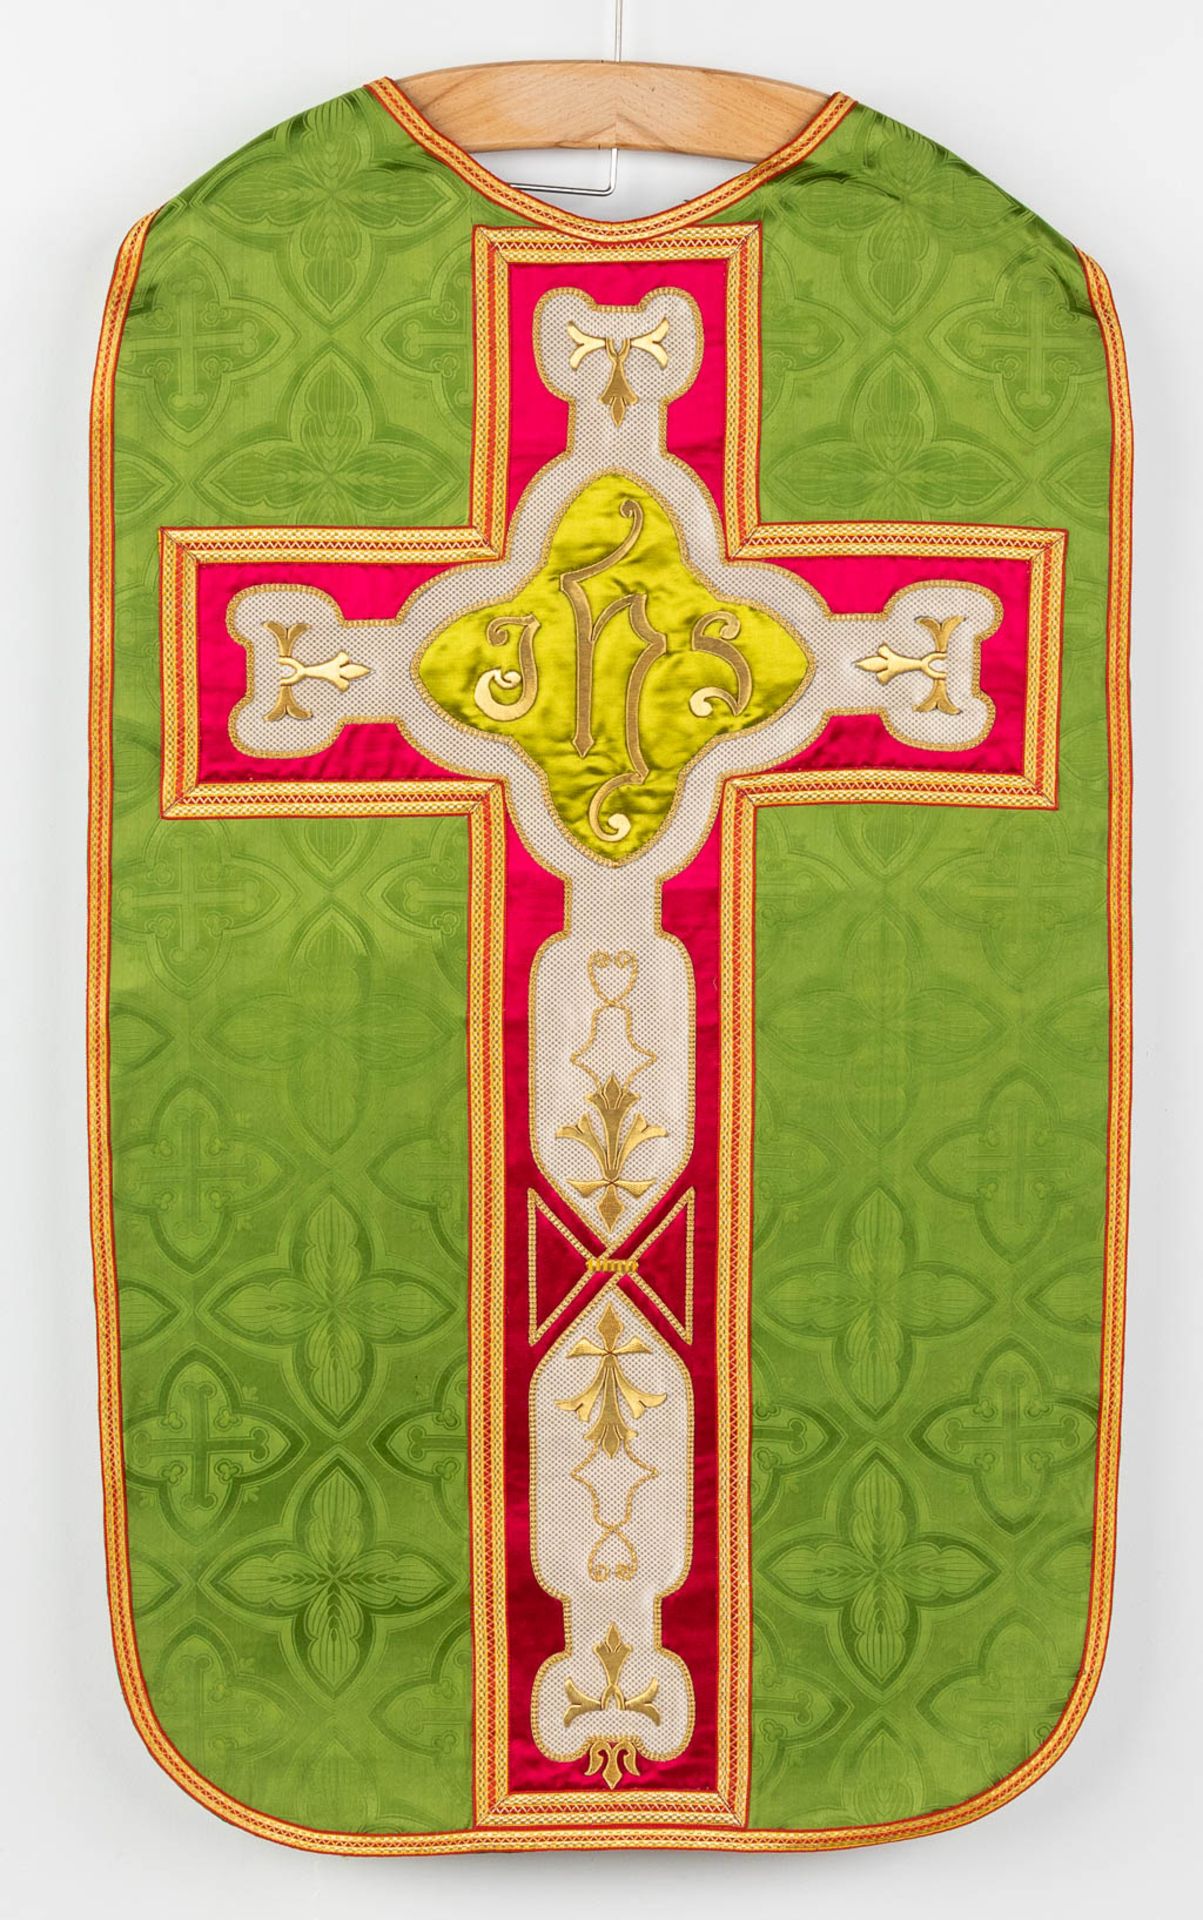 A set of 6 Roman Chasubles, maniple, Stola and Chalice veils - Image 19 of 37